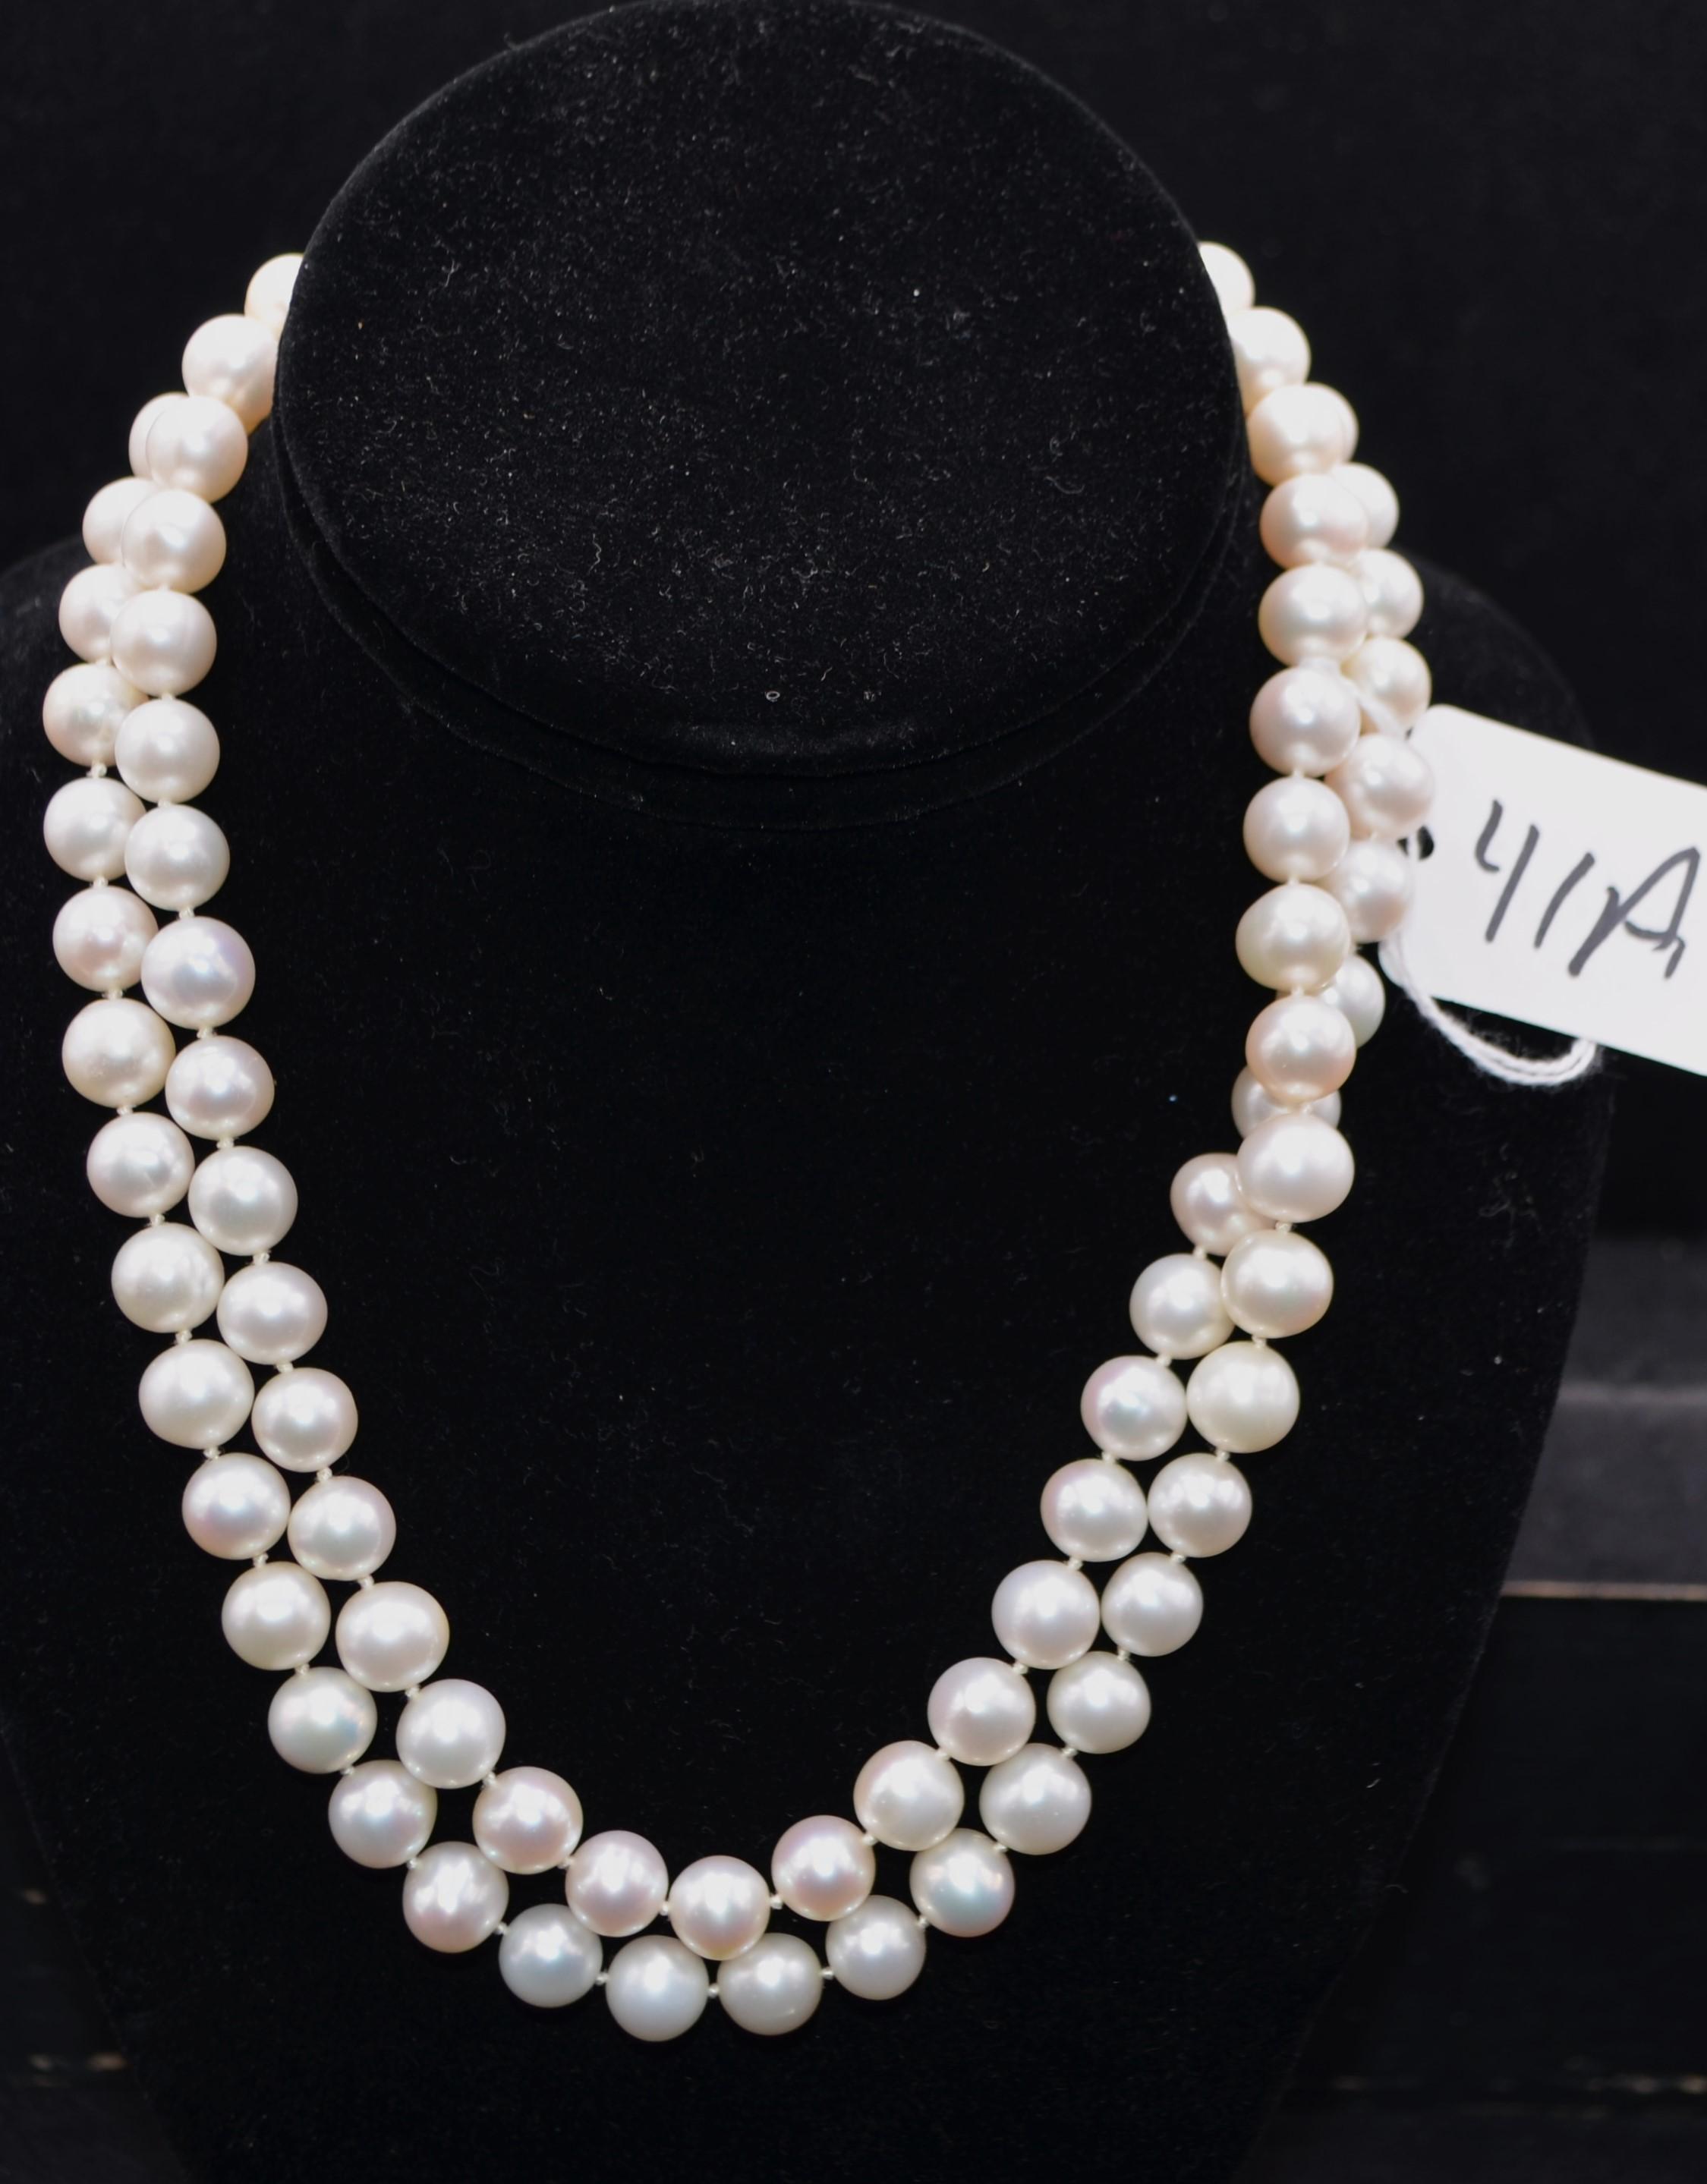 37 INCH 14K STRAND OF 9 MM WHITE PEARLS